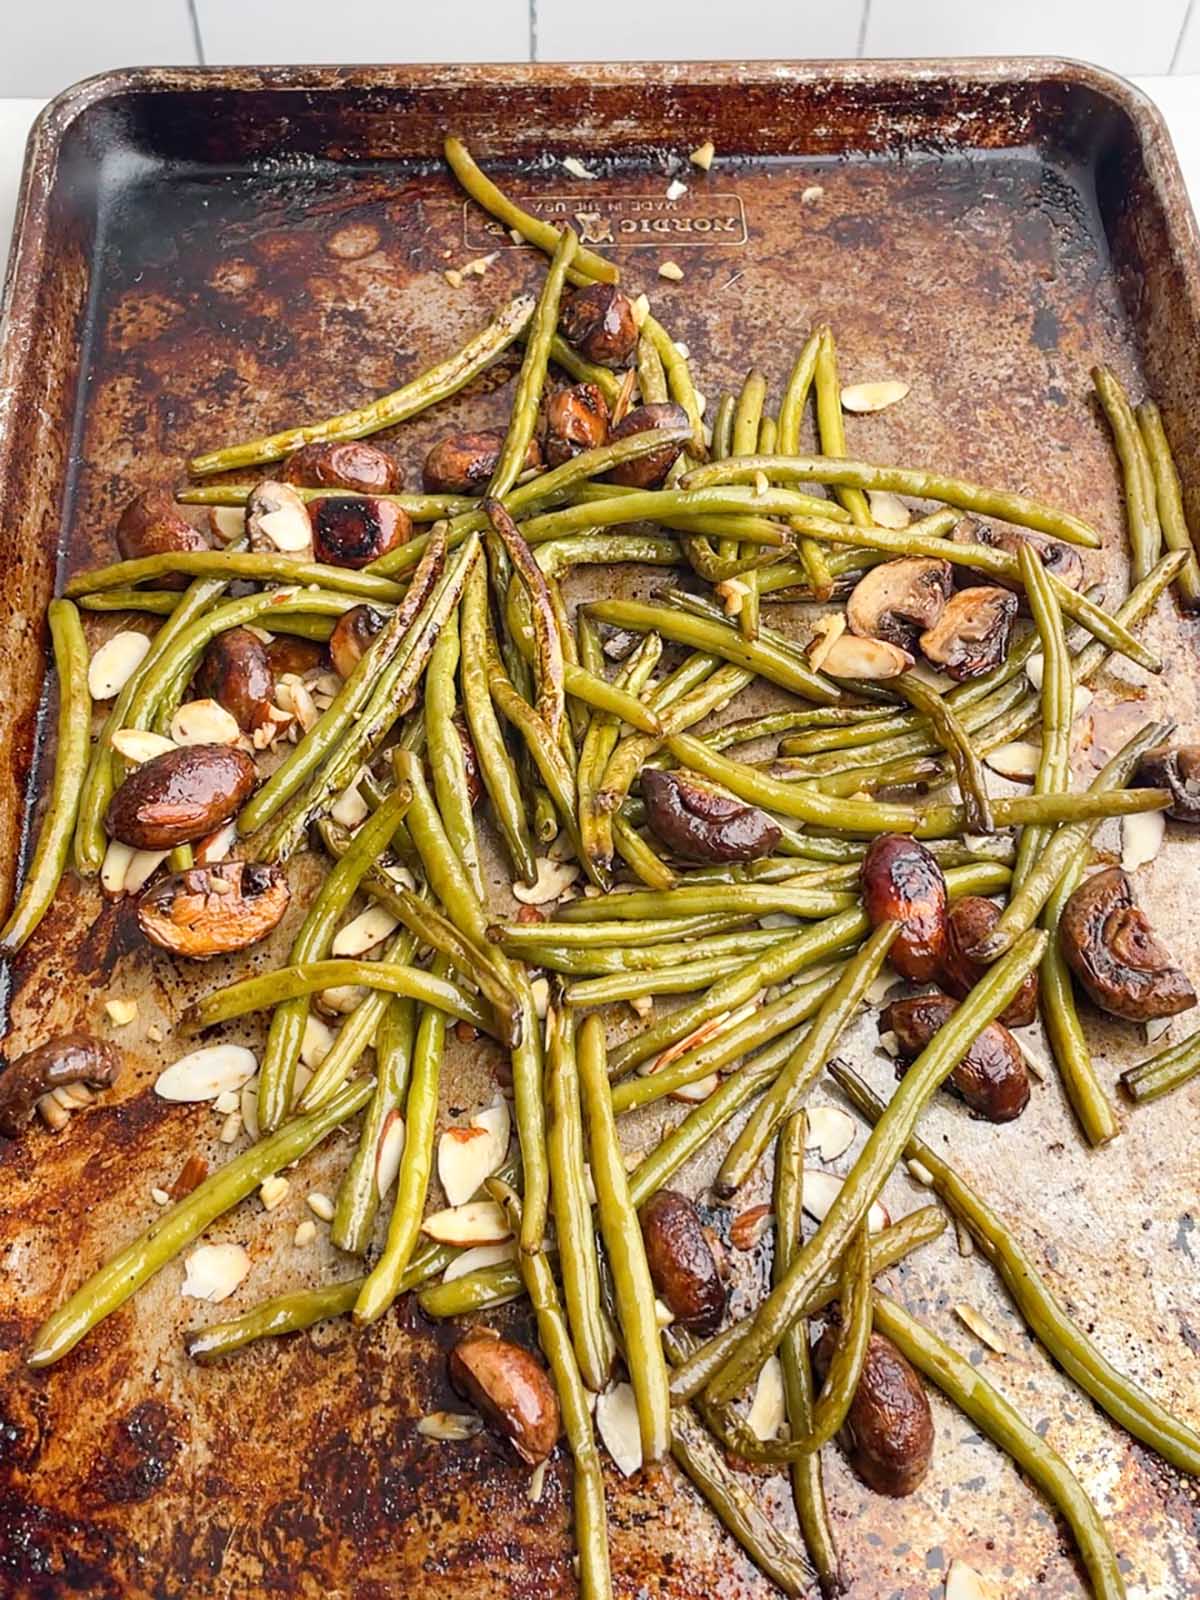 green beans and mushrooms on a sheet pan